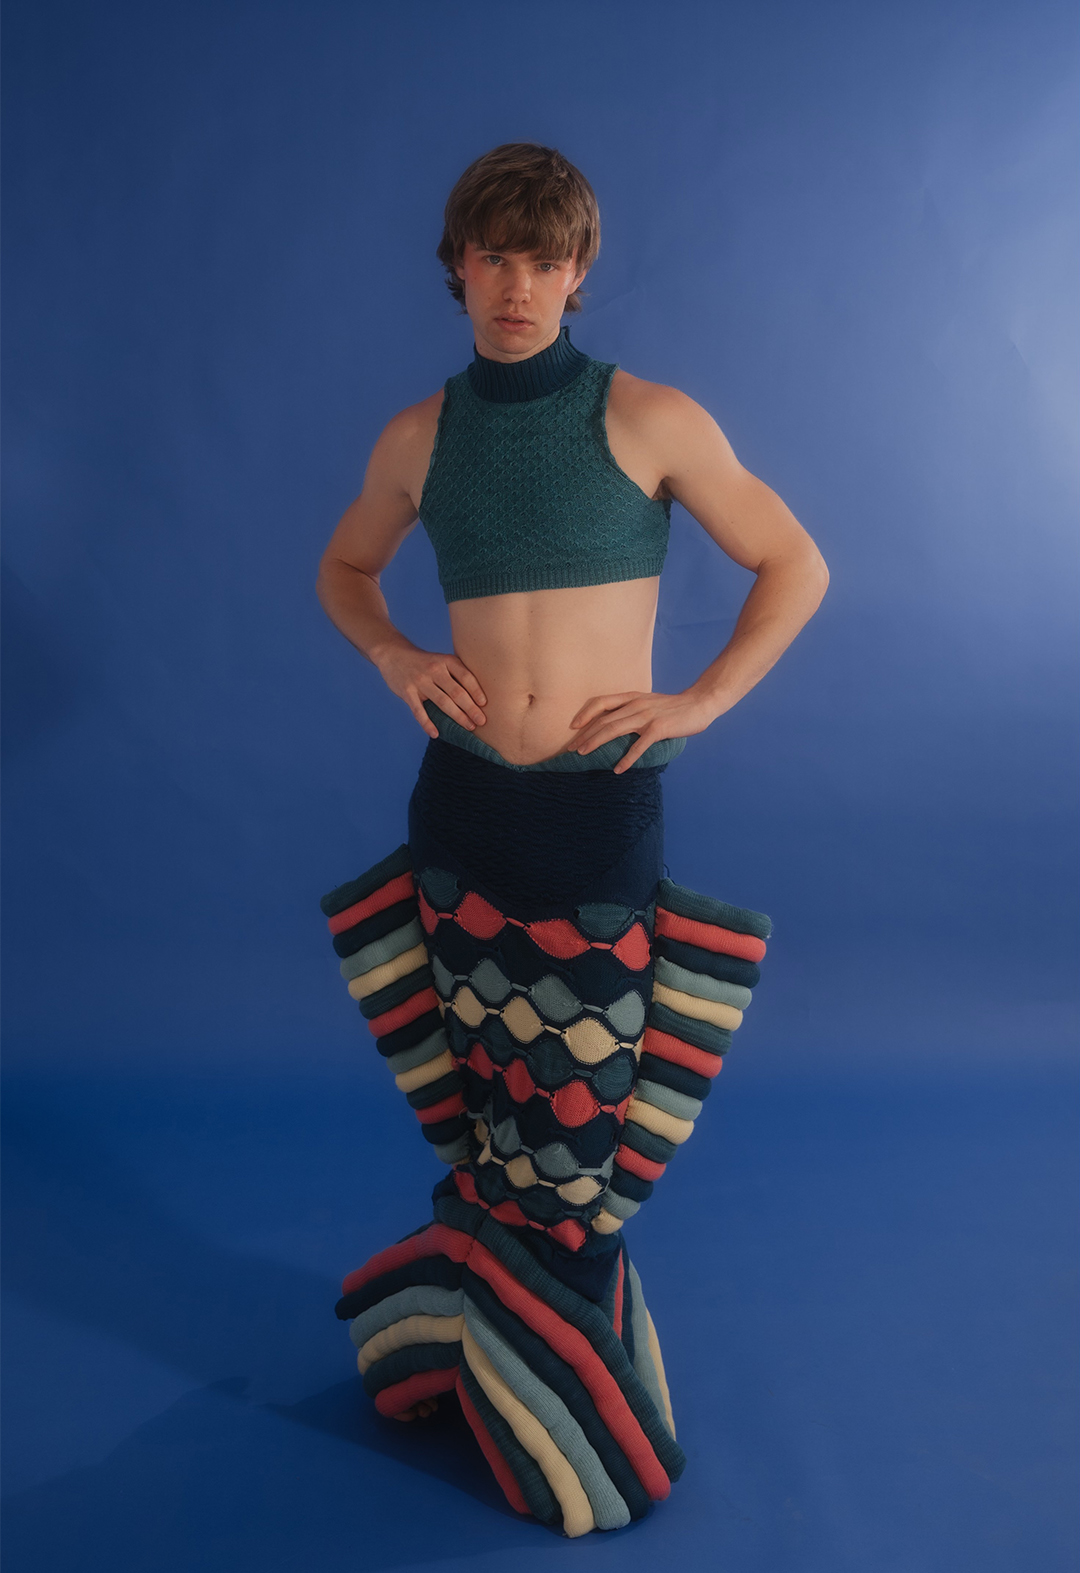 The model is facing front and wearing a blue, multicolored sculptural fish skirt and teal knit tank top.